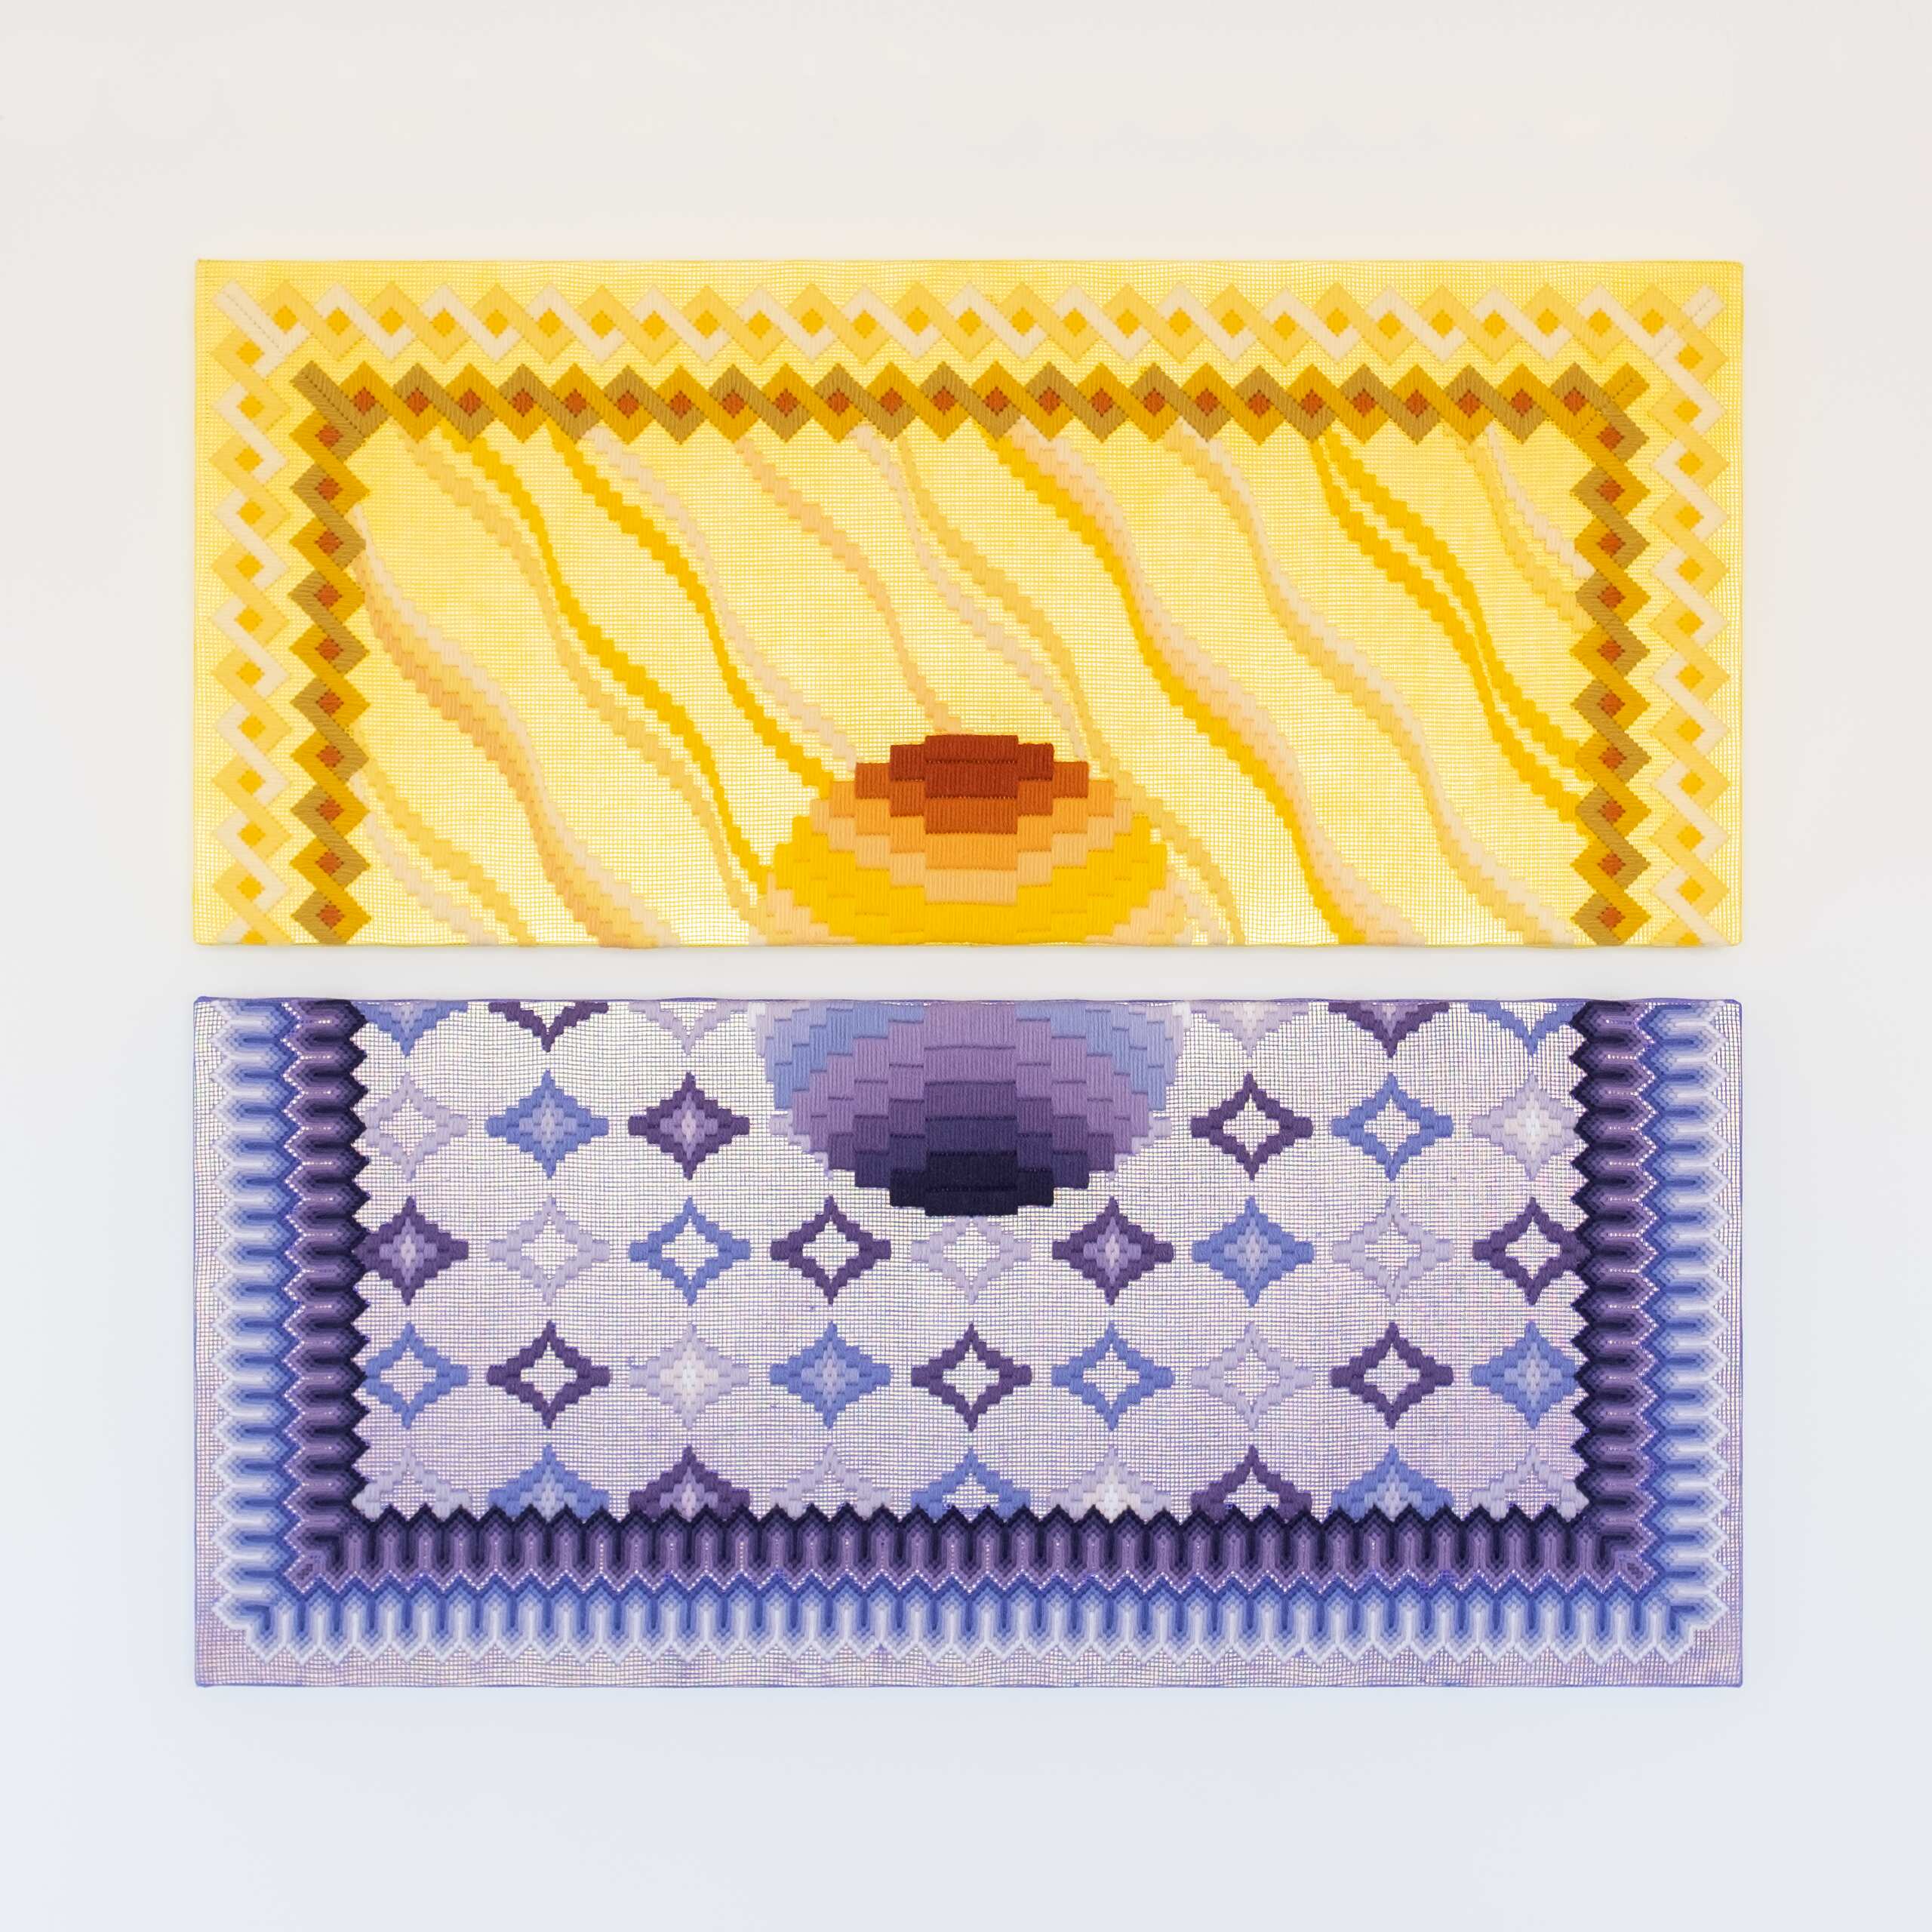 The dawn of a new day [yellow & purple], Hand-embroidered wool thread and acrylic paint on canvas over gilded panel, 2020